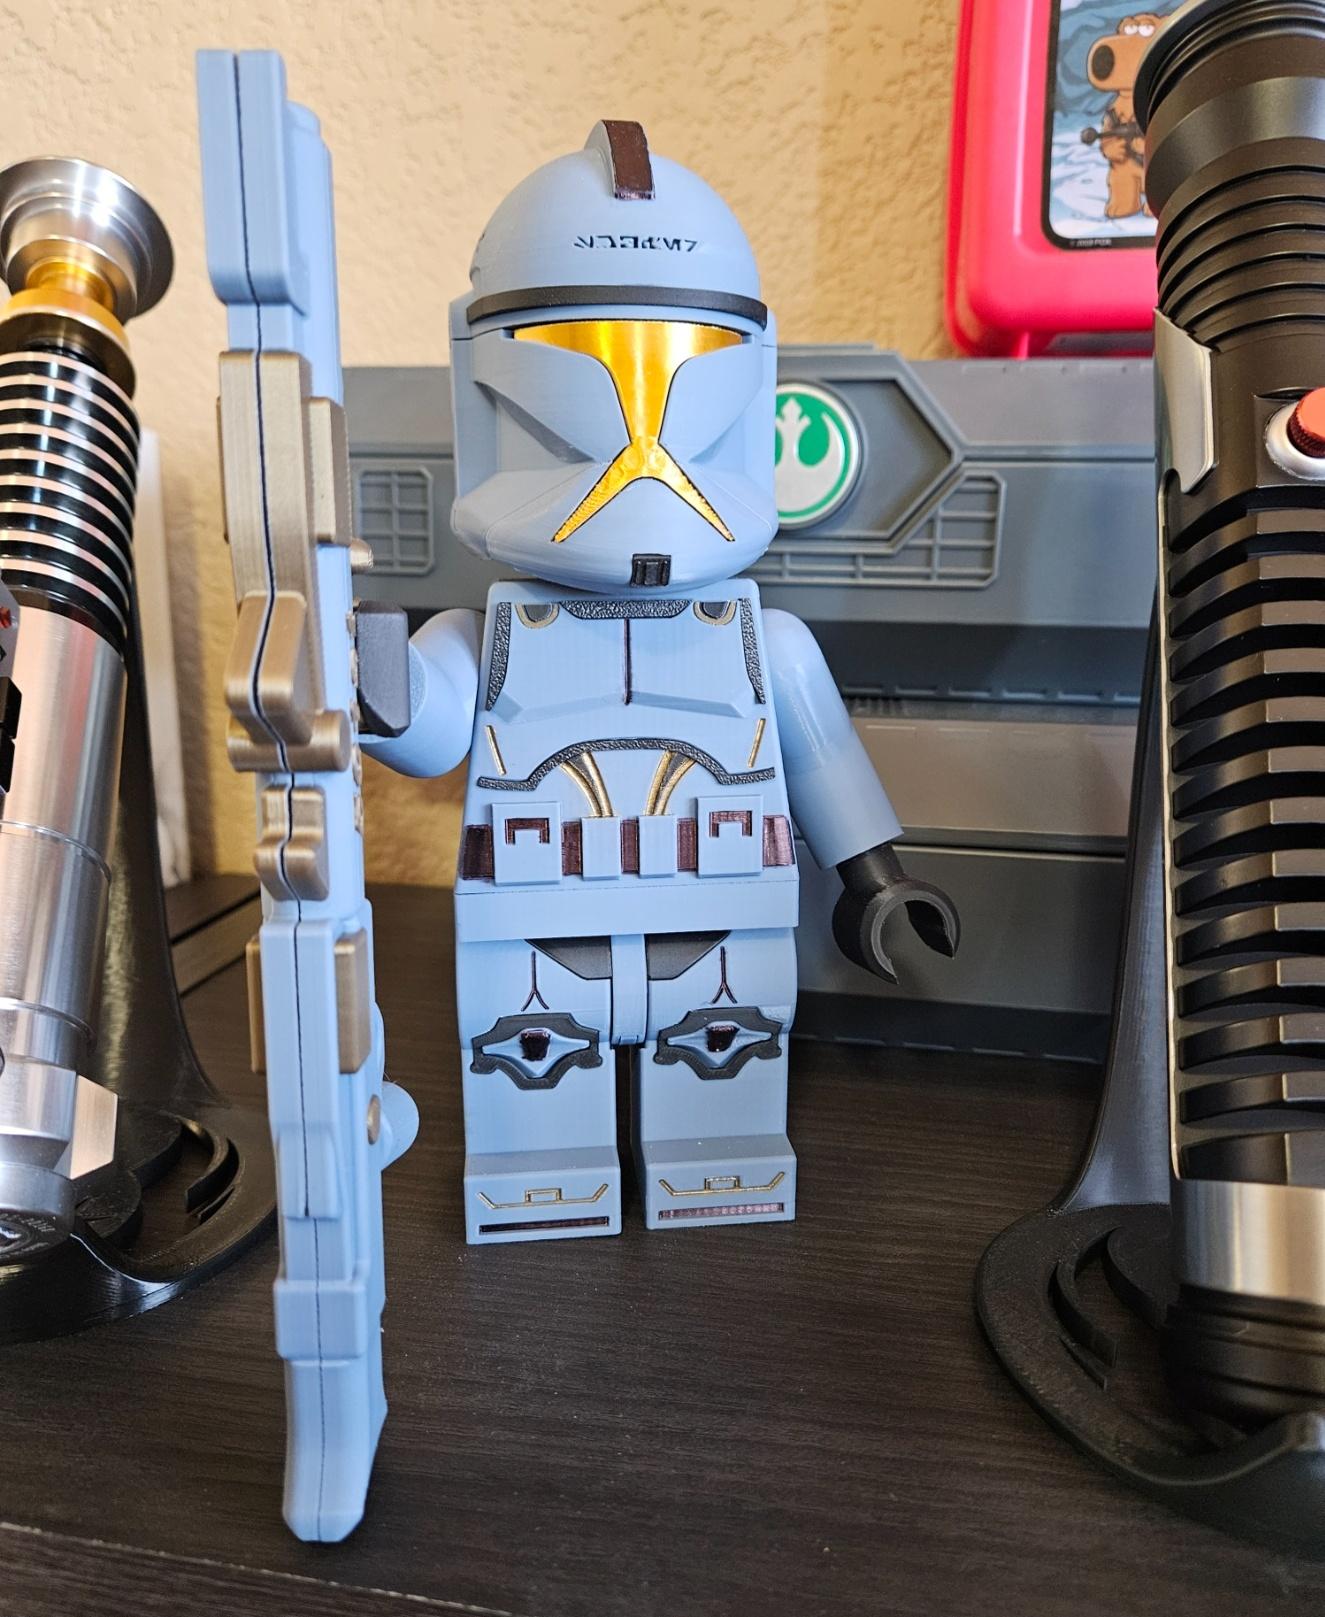 Clone Trooper - Phase I (6:1 LEGO-inspired brick figure, NO MMU/AMS, NO supports, NO glue) - Great models, even more fun to print. I modded mine into a "501st Senate Trooper". Granted Senate Guards aren't troopers or in the 501st. And, similar stuff for the 501st Clone Troopers. Just a fun idea I came up with. - 3d model